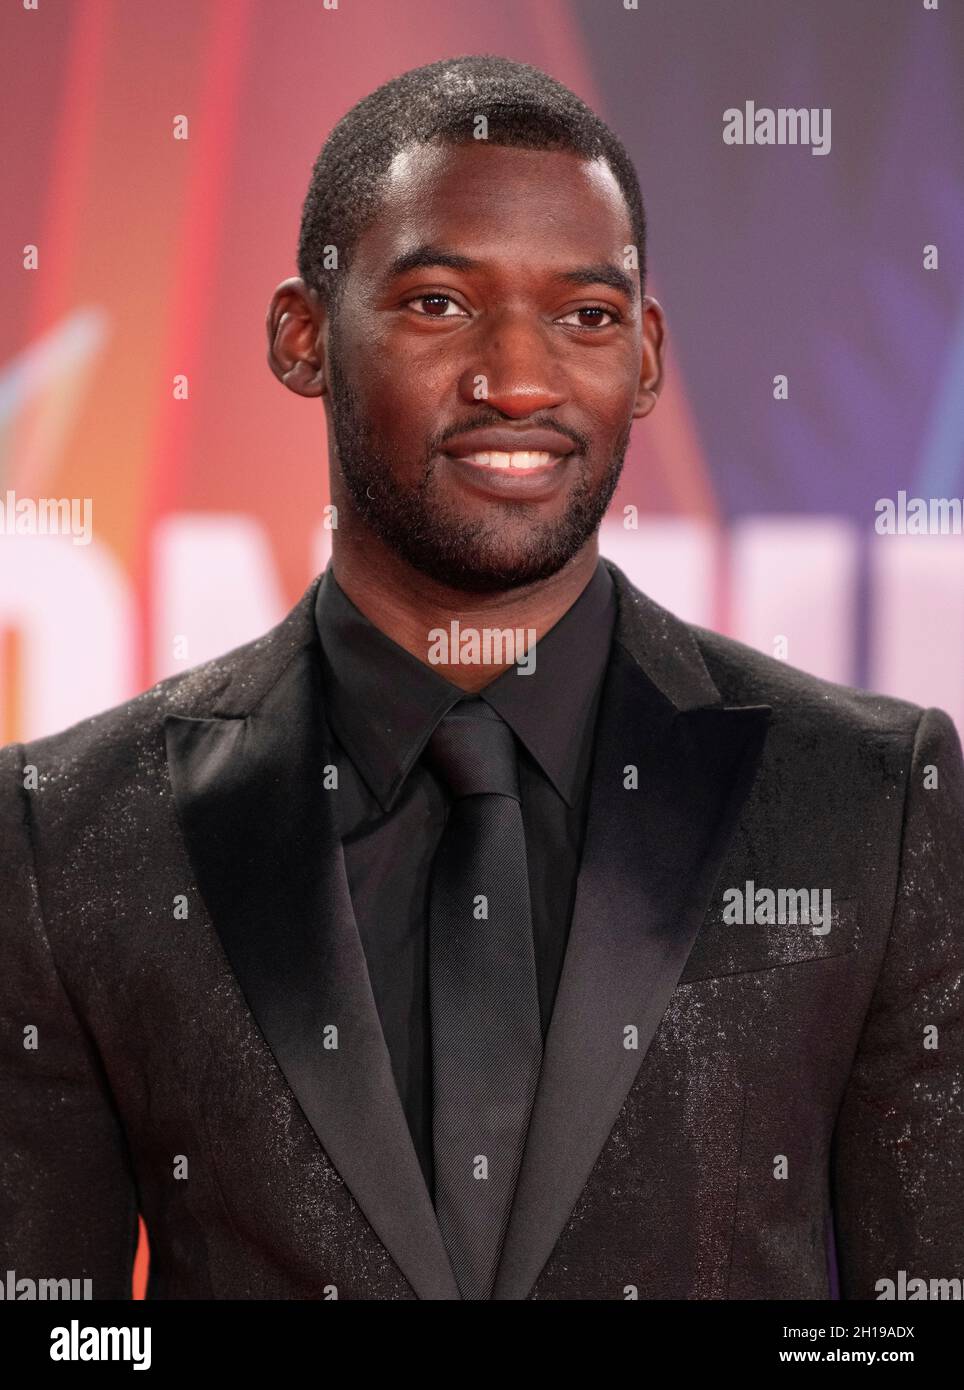 London, UK. 17th Oct, 2021. LONDON, ENGLAND - OCTOBER 17: Malachi Kirby attends the closing night gala of 'The Tragedy of Macbeth' during the 65th BFI London Film Festival at The Royal Festival Hall on October 17, 2021 in London, England. Photo by Gary Mitchell/Alamy Live News Stock Photo